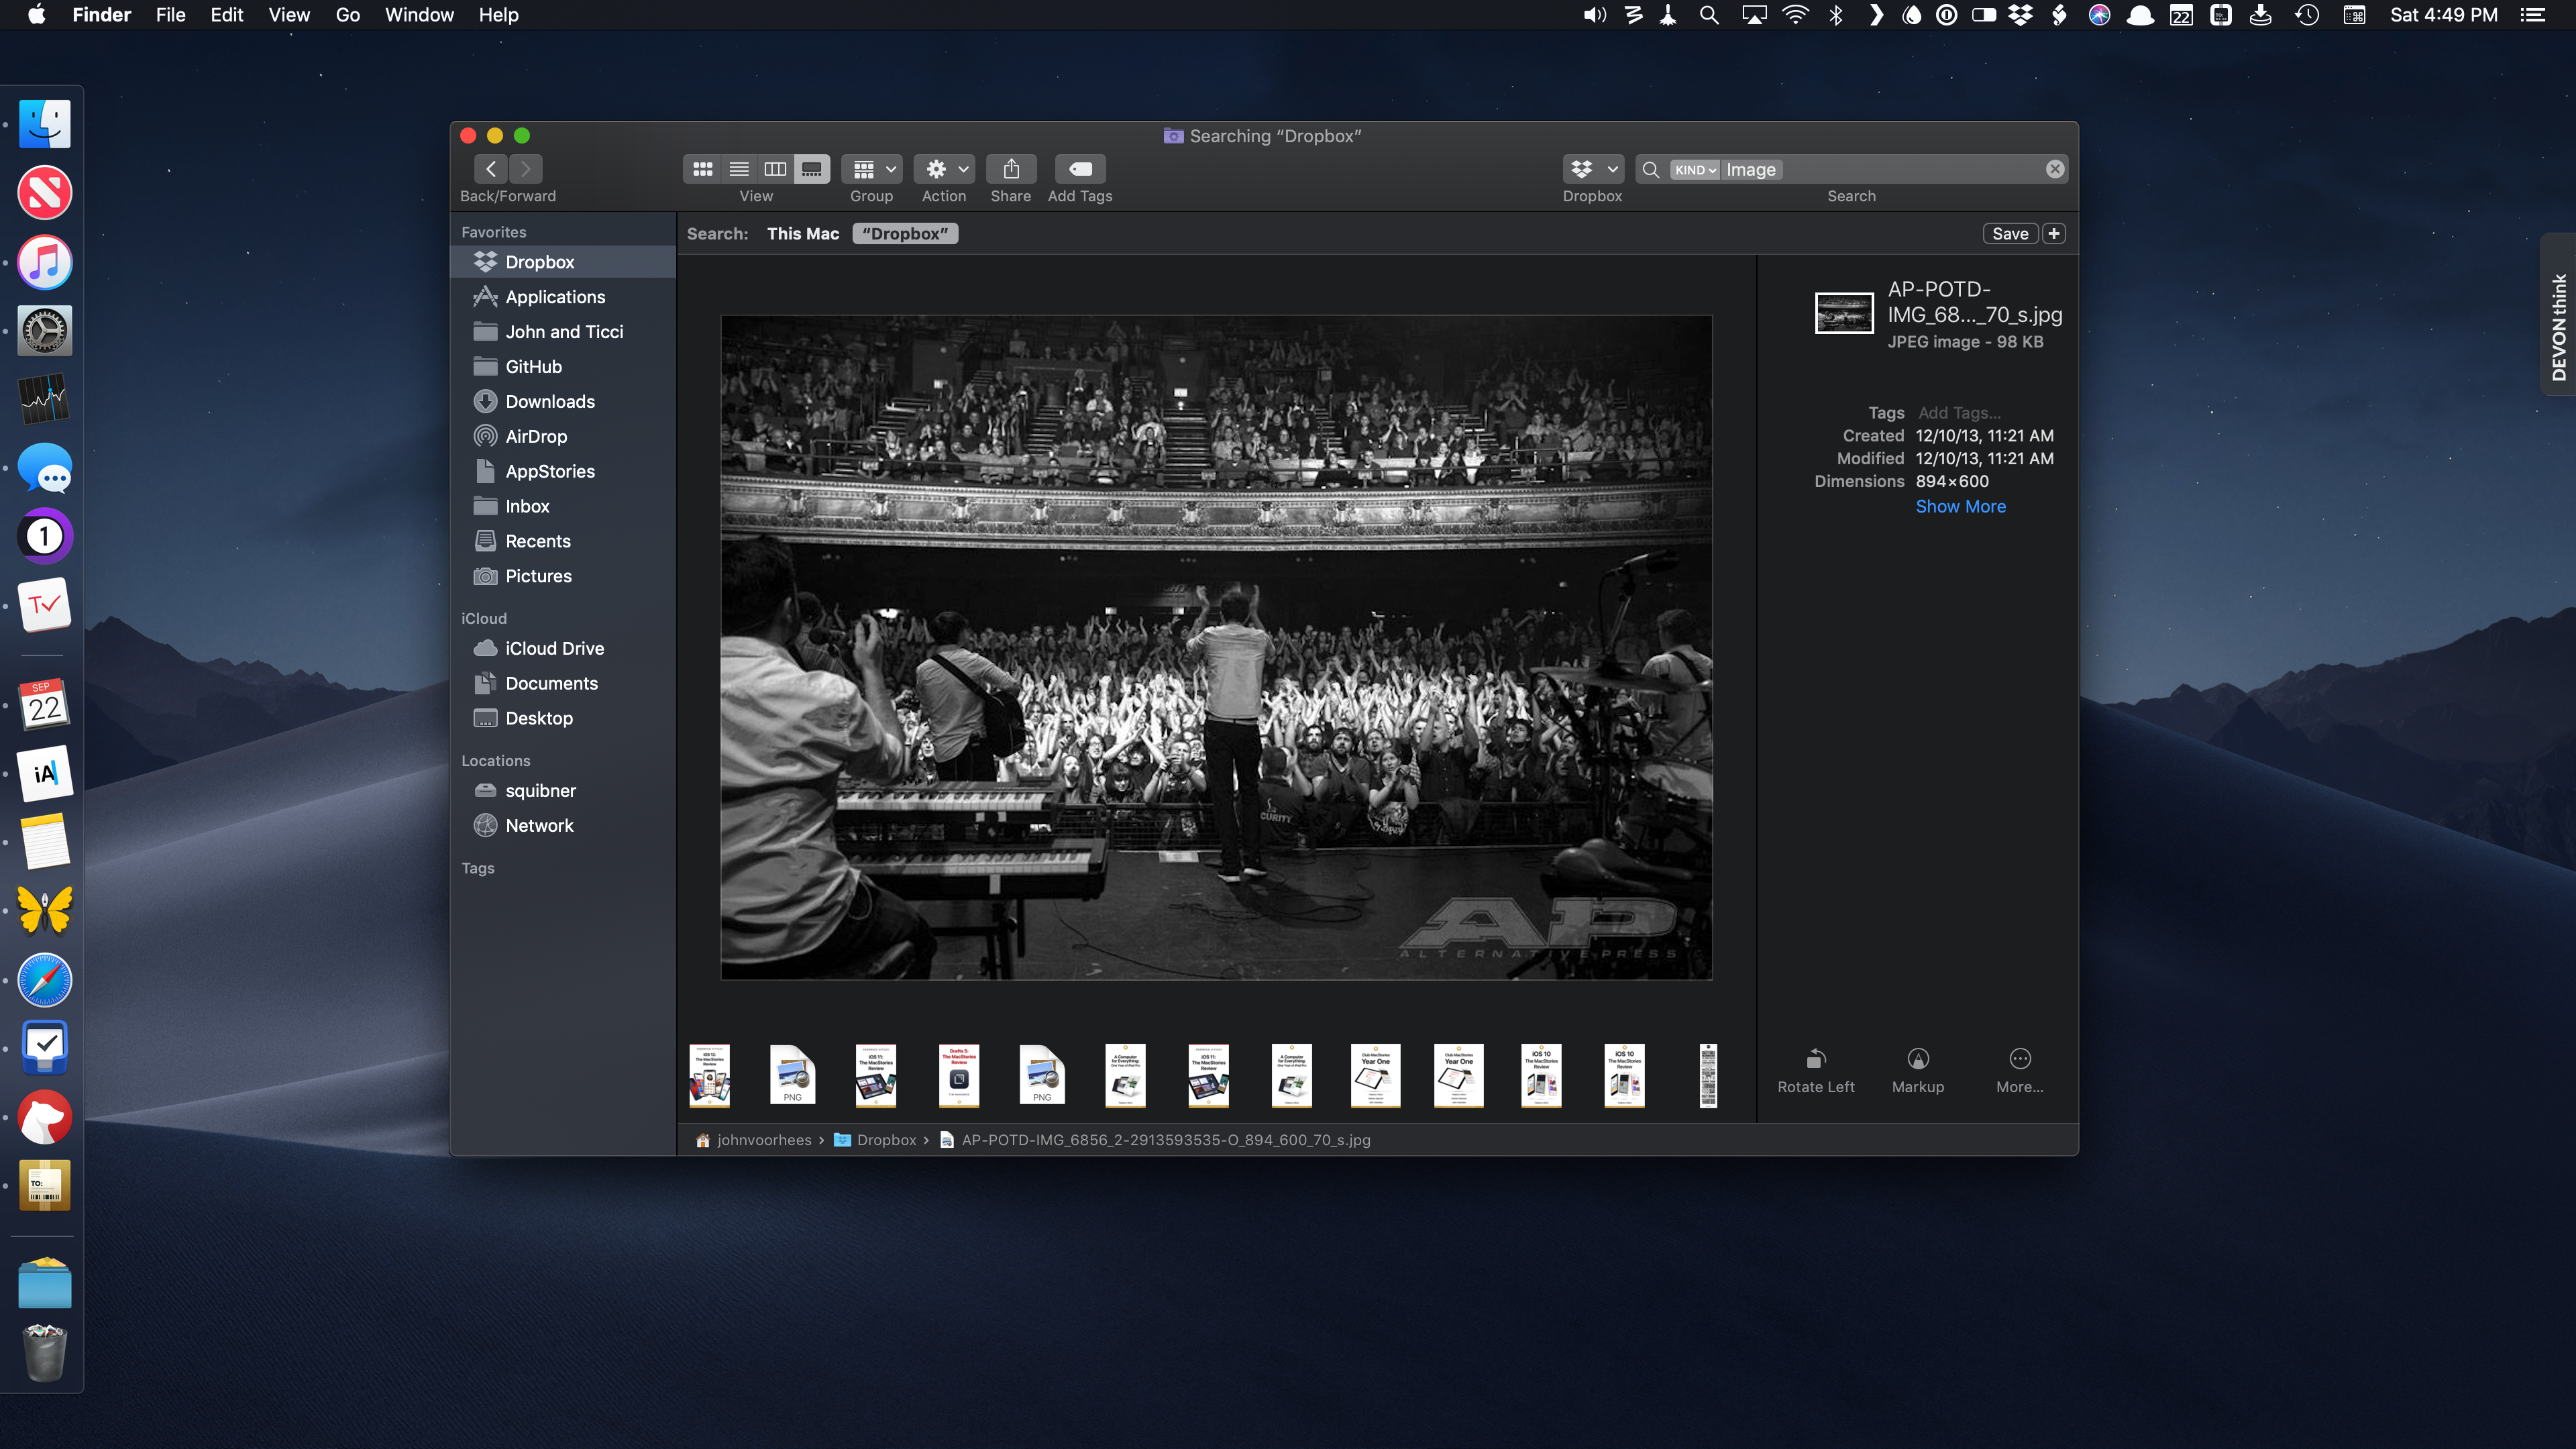 High-resolution Gallery previews make it possible to spot yourself in a crowd.